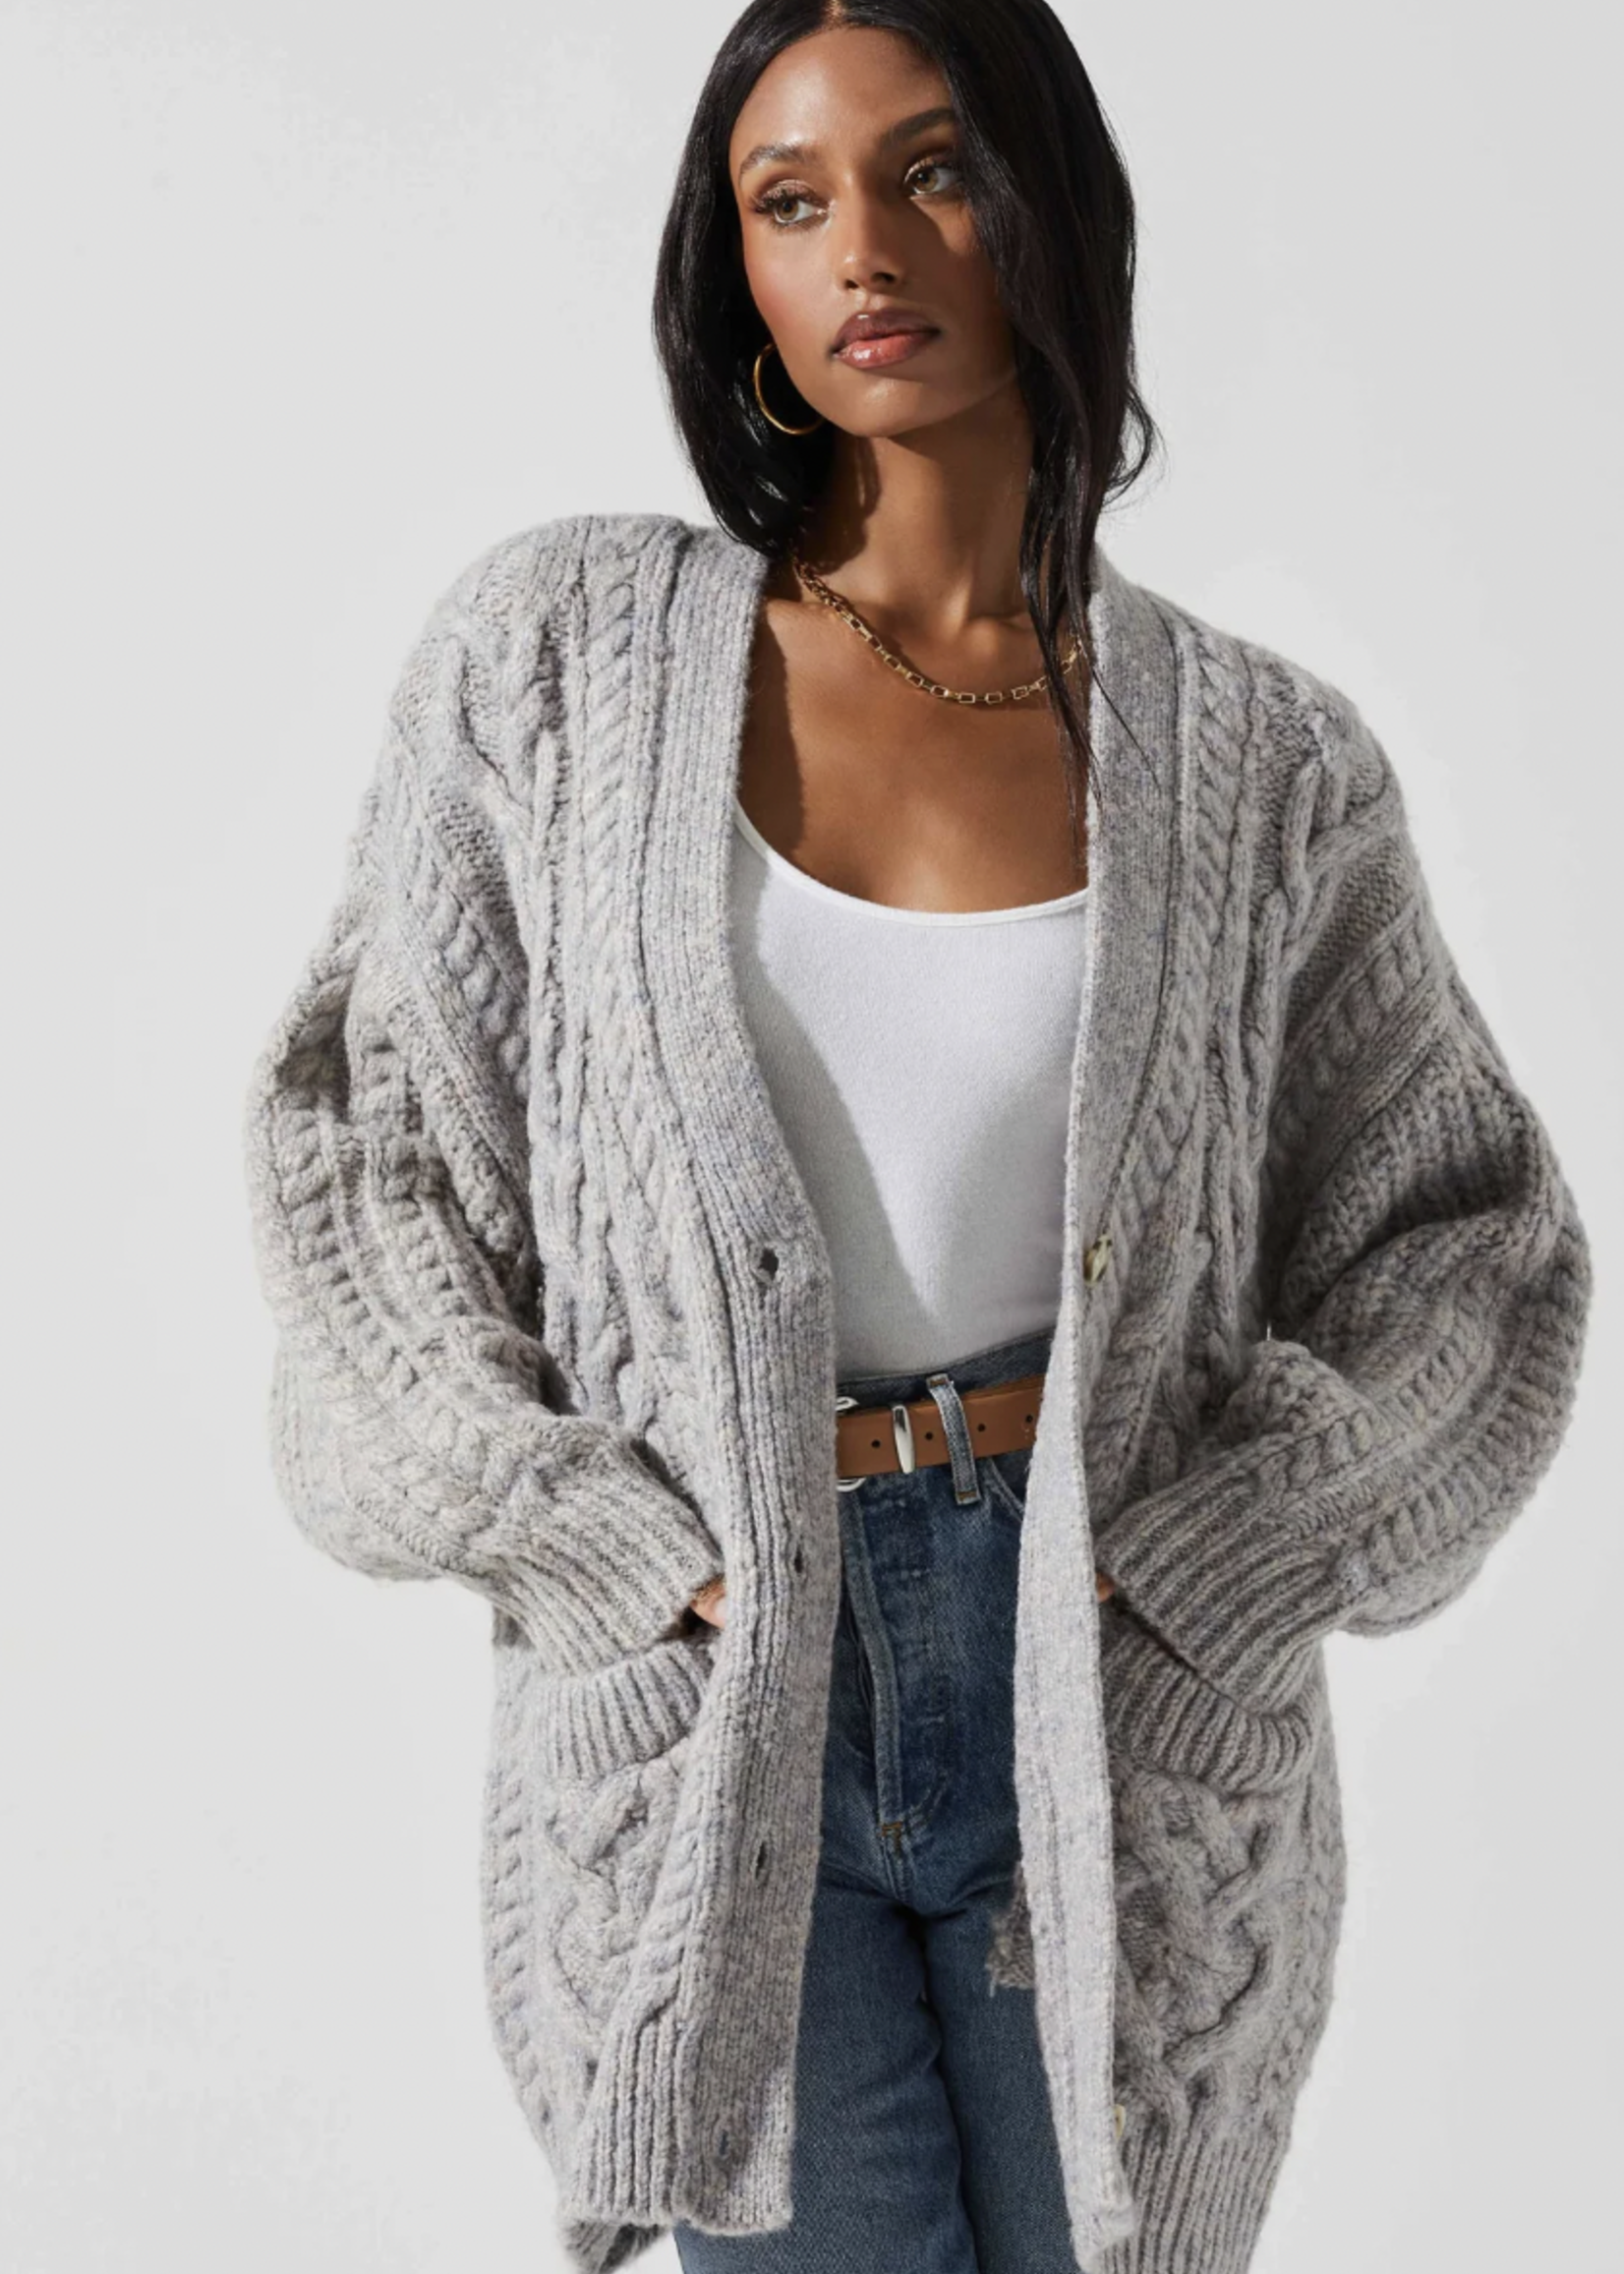 Elitaire Boutique Charlie Cardigan in Gray